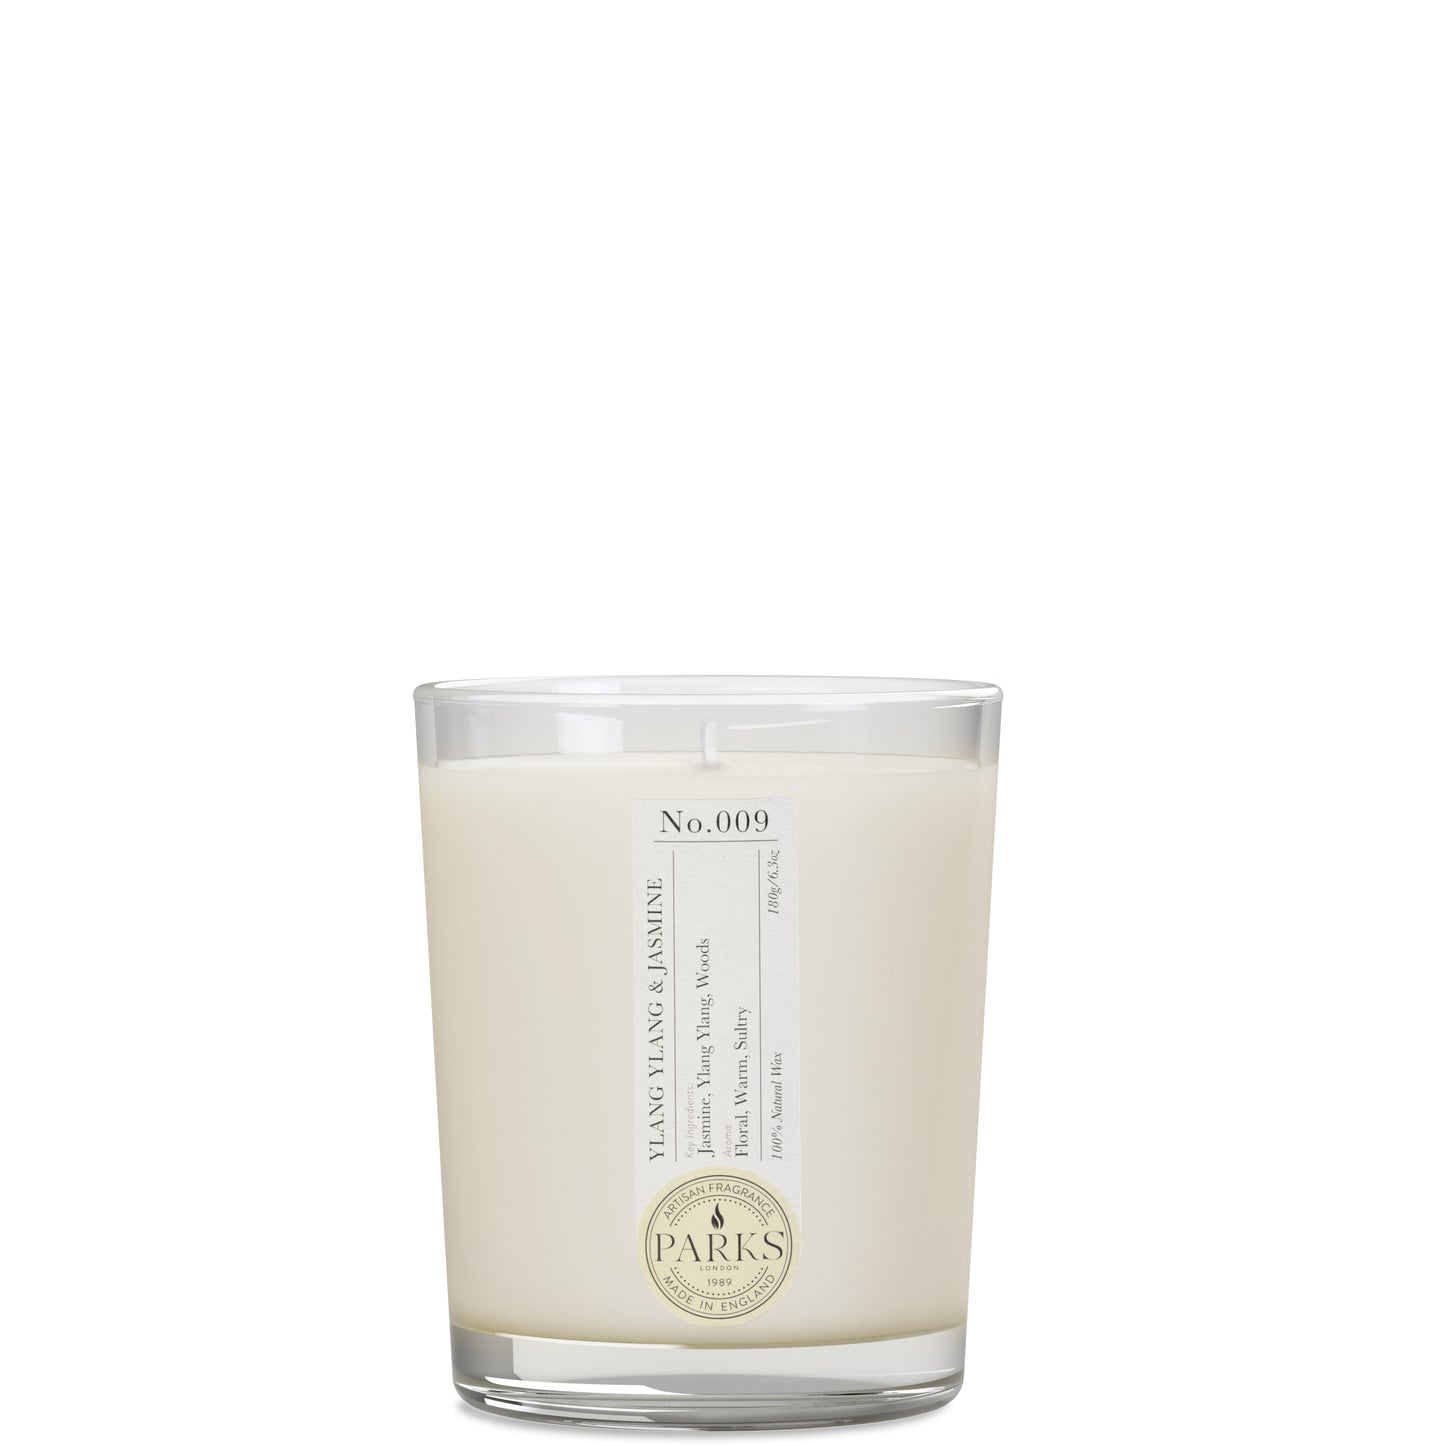 Parks London Home Collection Ylang Ylang and Jasmine Candle 180g